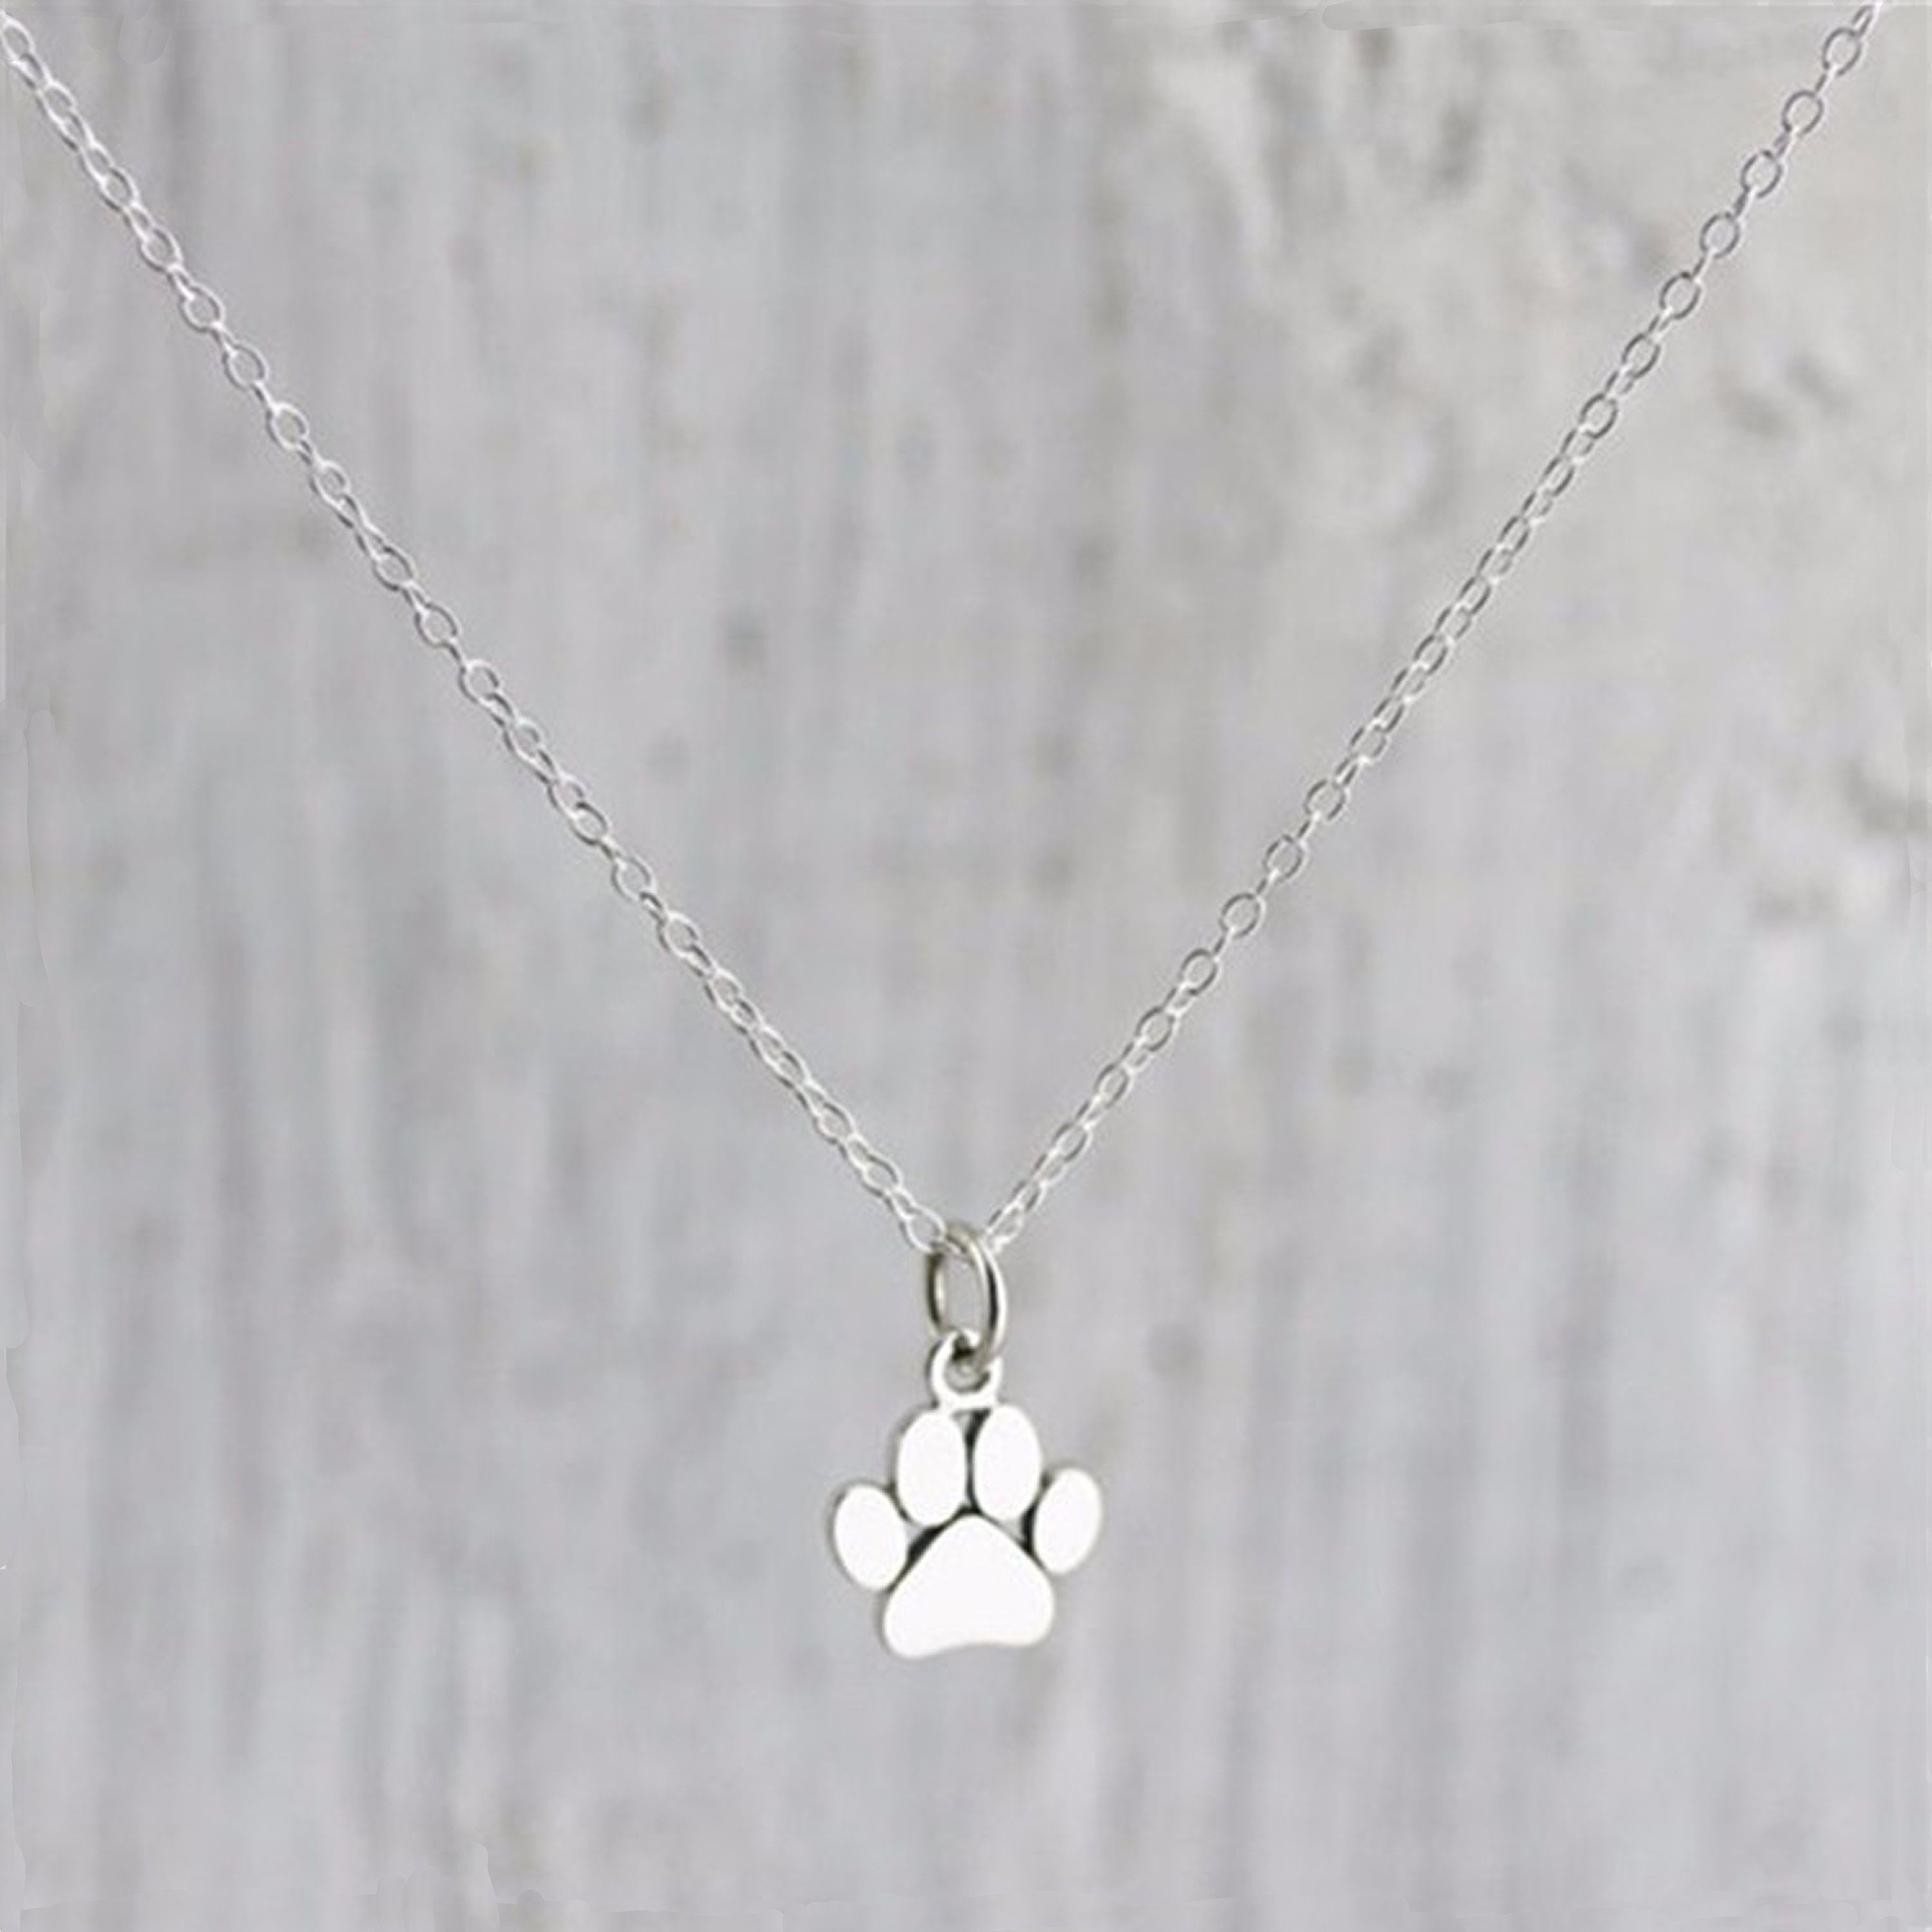 Paw Print Charm Necklace Sterling Silver Paw Necklace Gold - Etsy